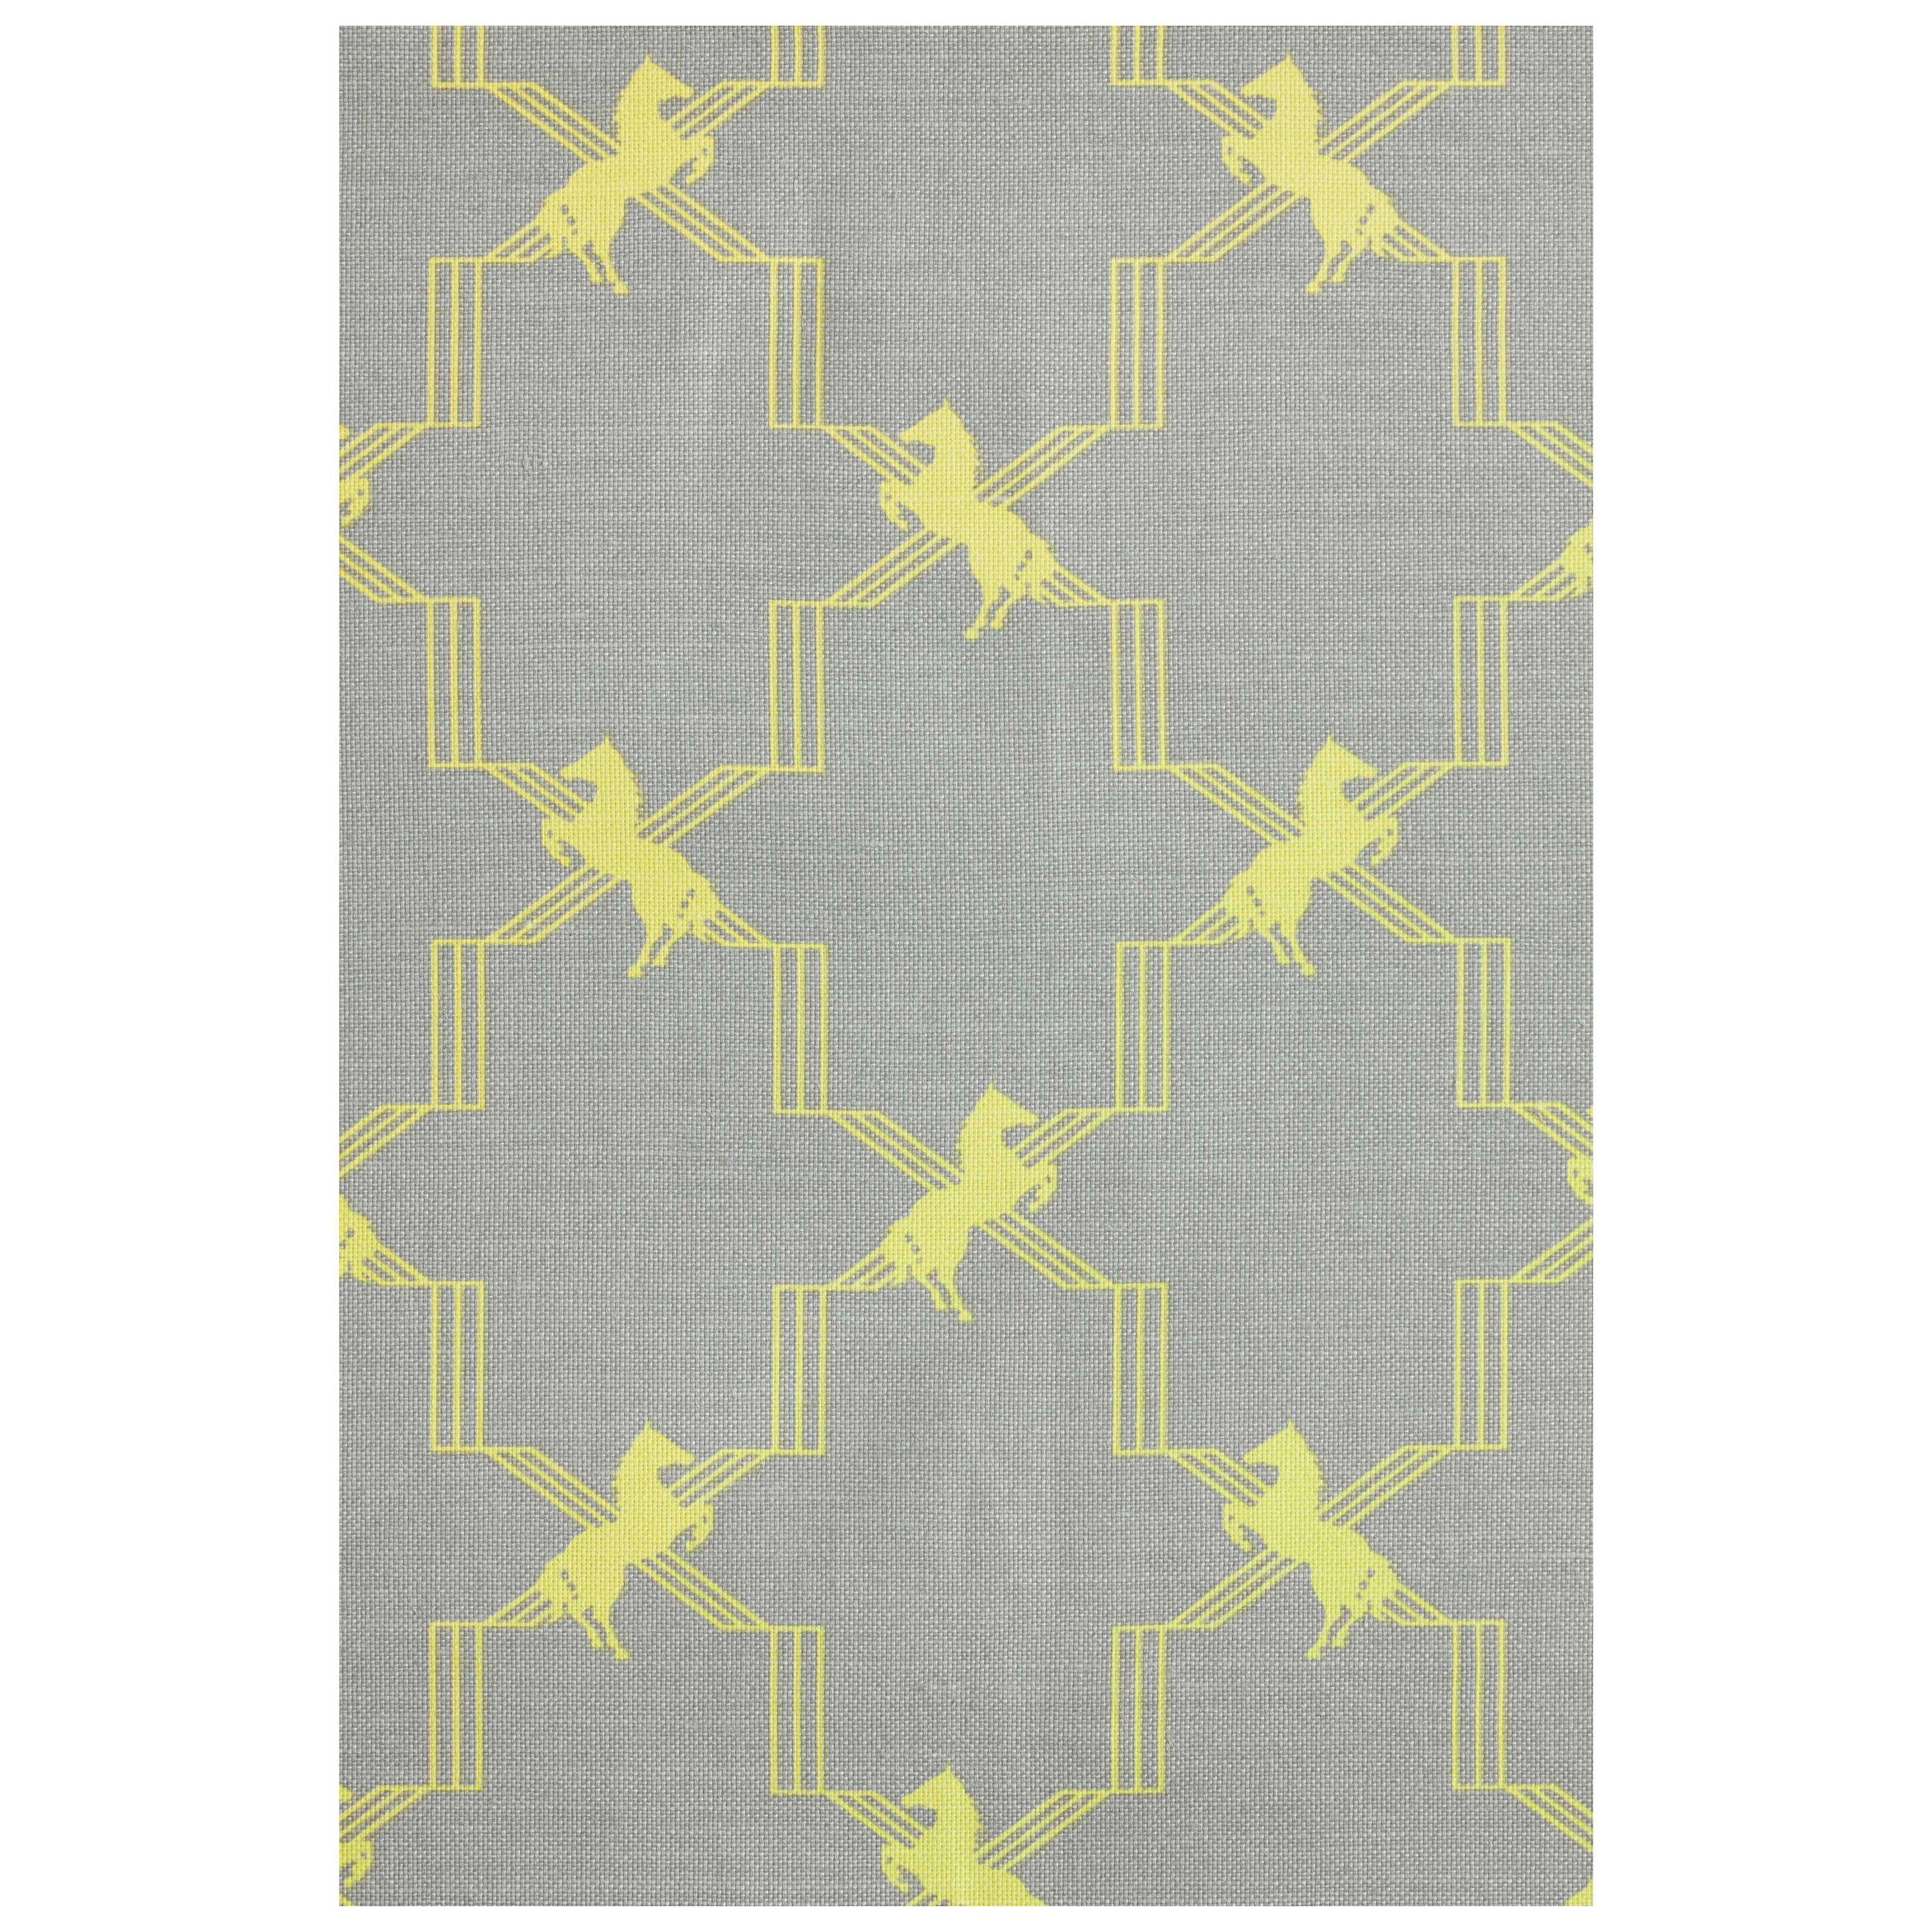 'Horse Trellis' Contemporary, Traditional Fabric in Acid Yellow on Grey For Sale